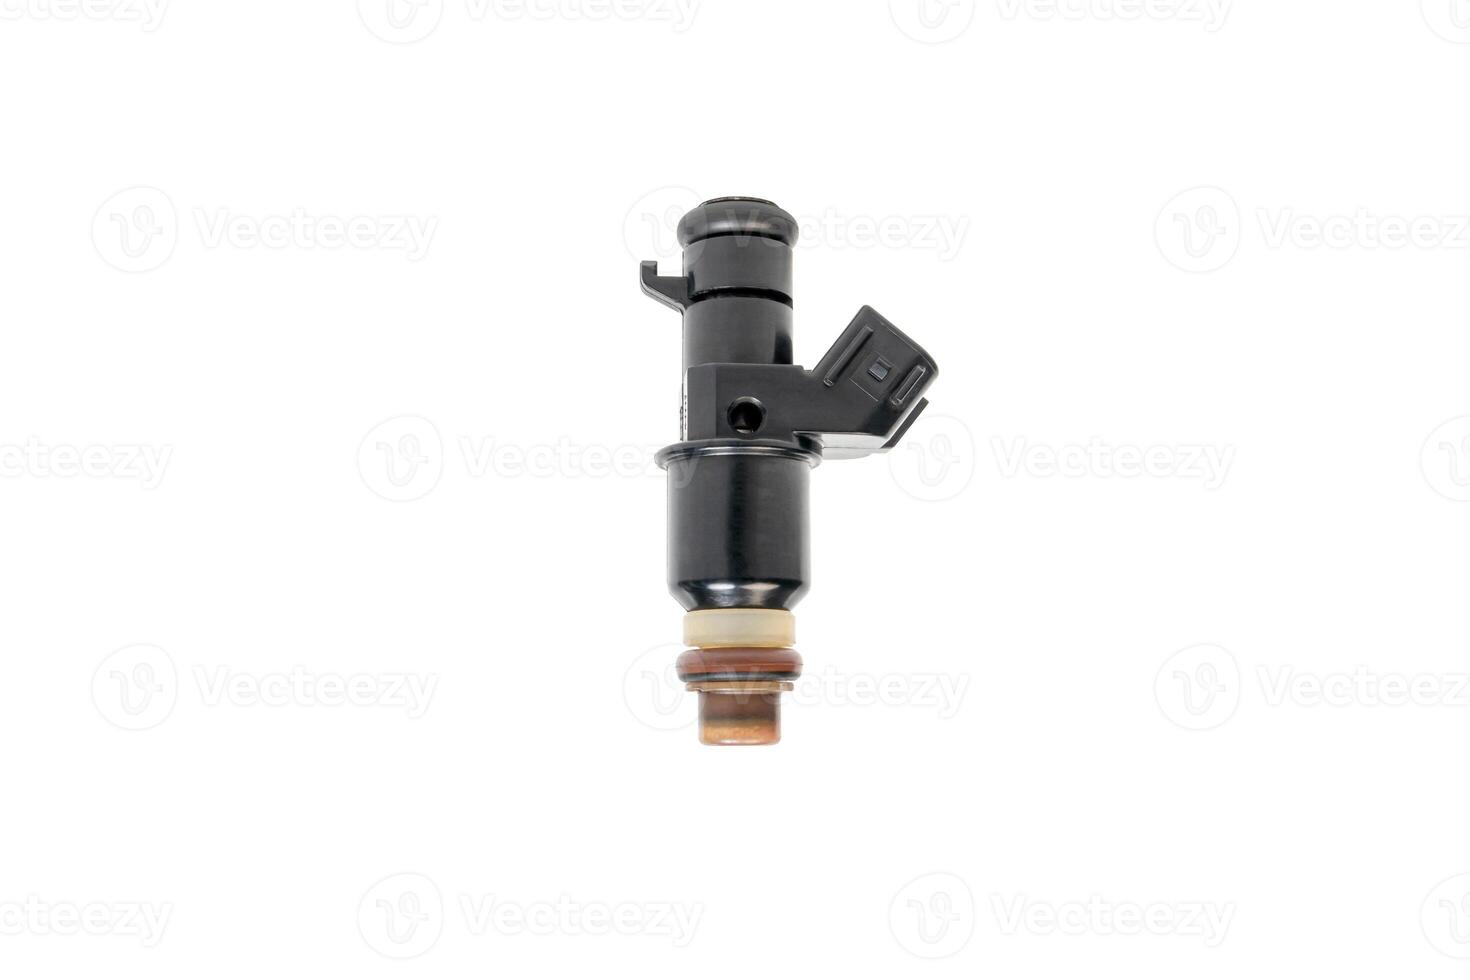 Old Gasoline injector part for car in engine system in white background photo